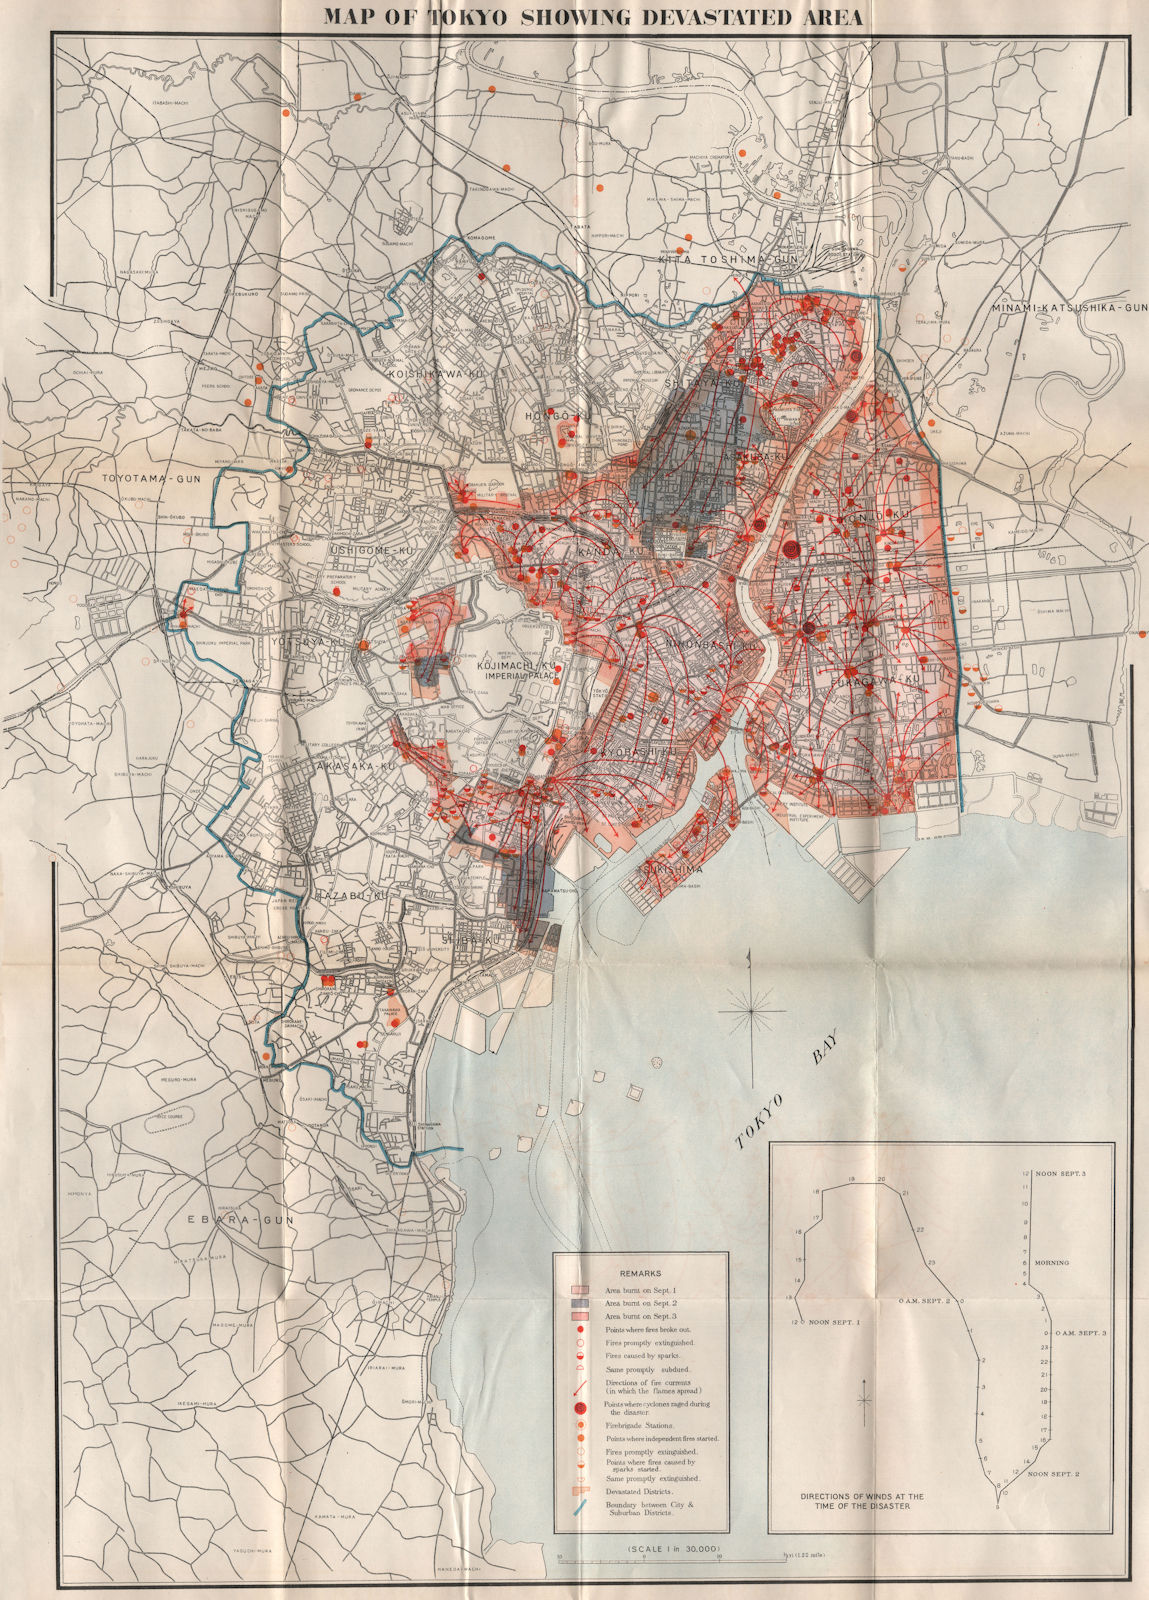 Associate Product GREAT KANTO EARTHQUAKE 1923. Tokyo showing devastated area/fires. Japan 1926 map